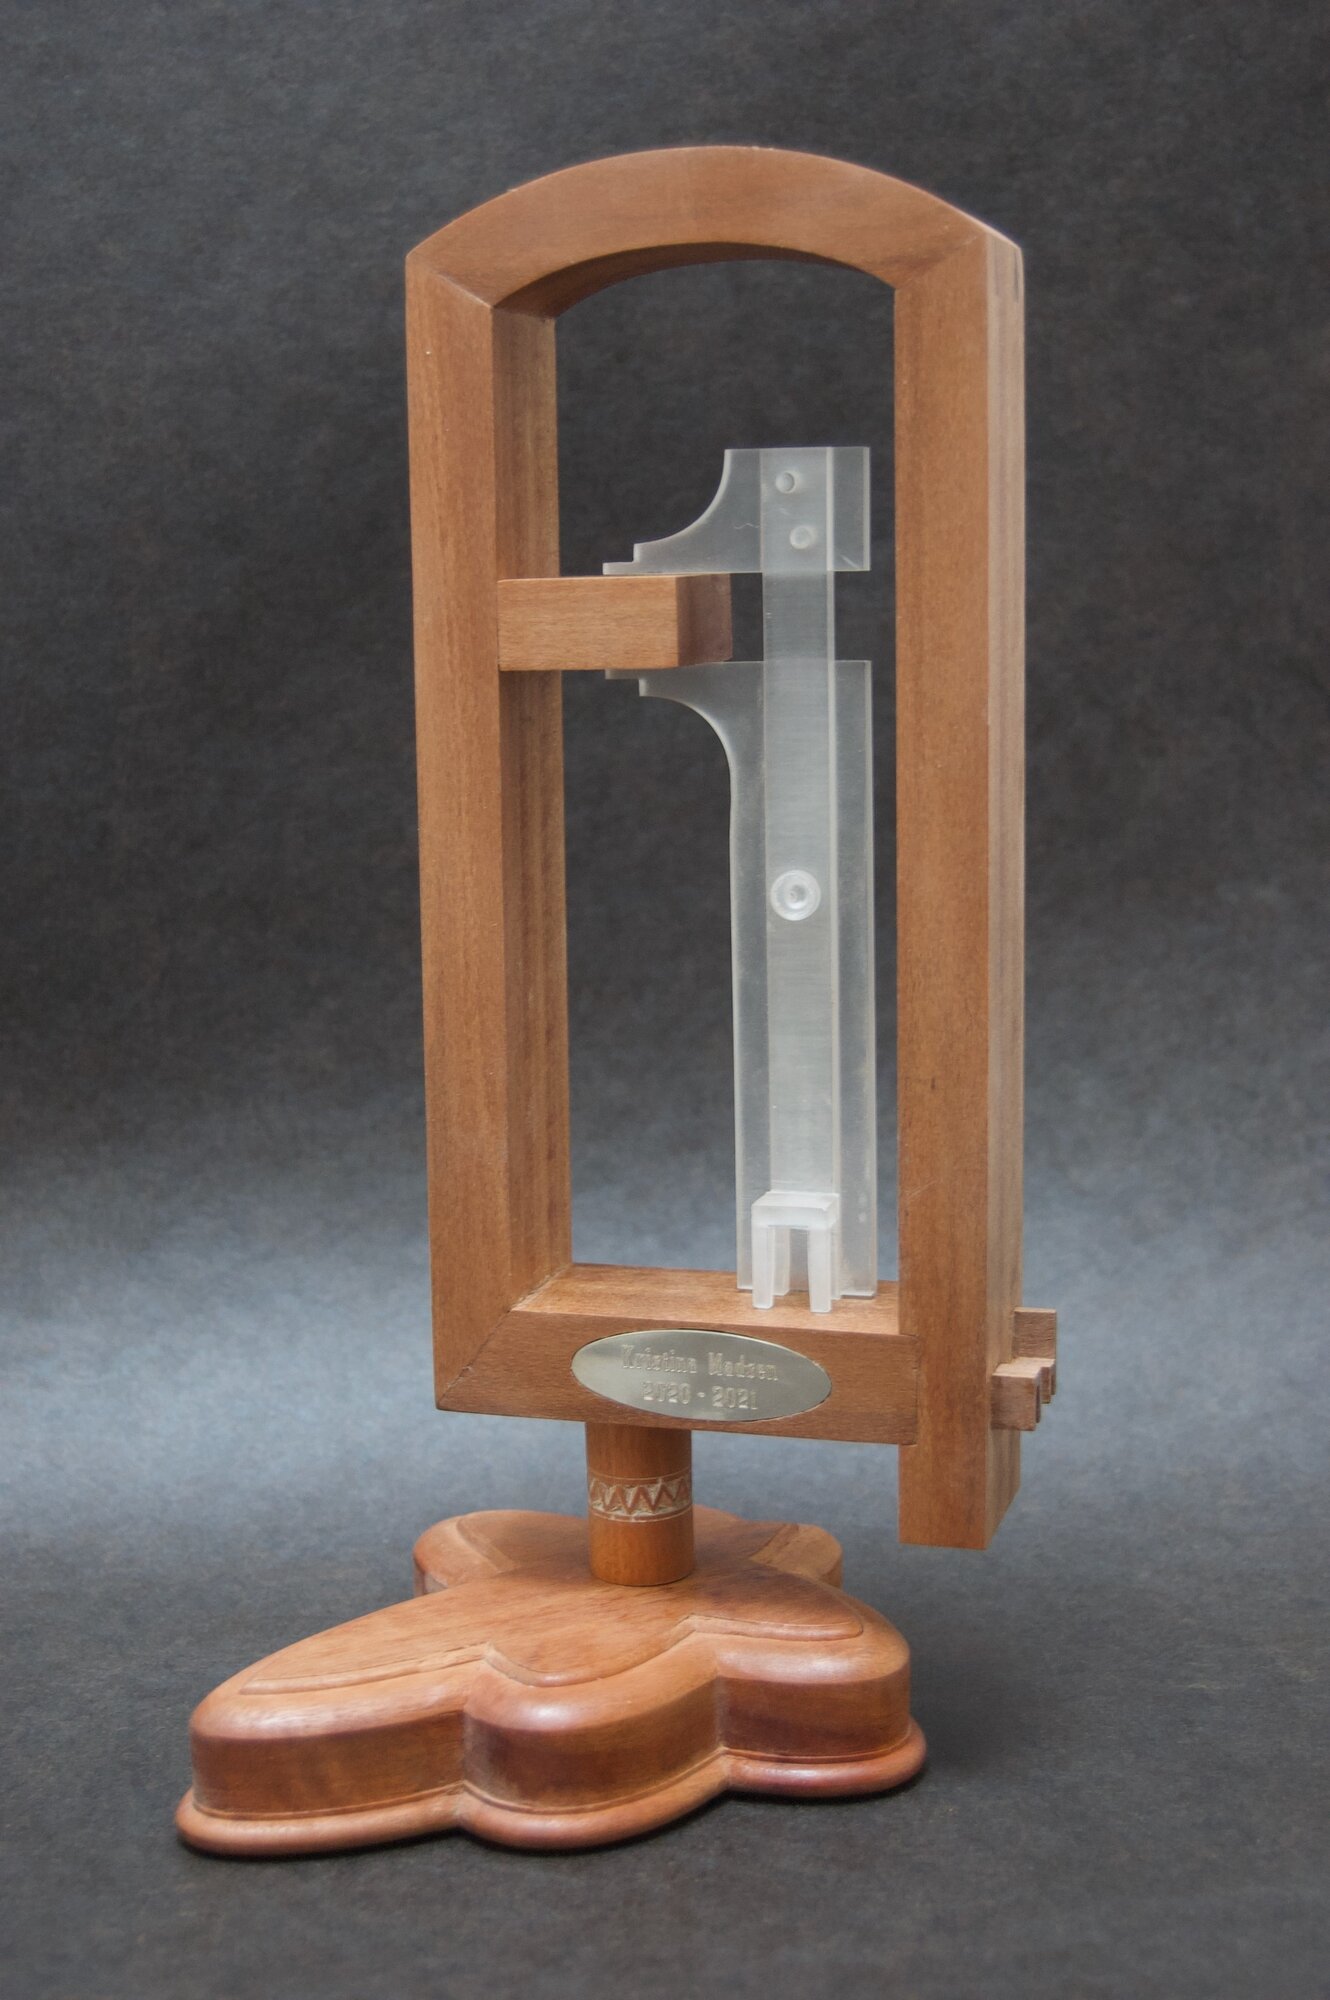 AoD Trophy - Designed & Created by Fred Rose